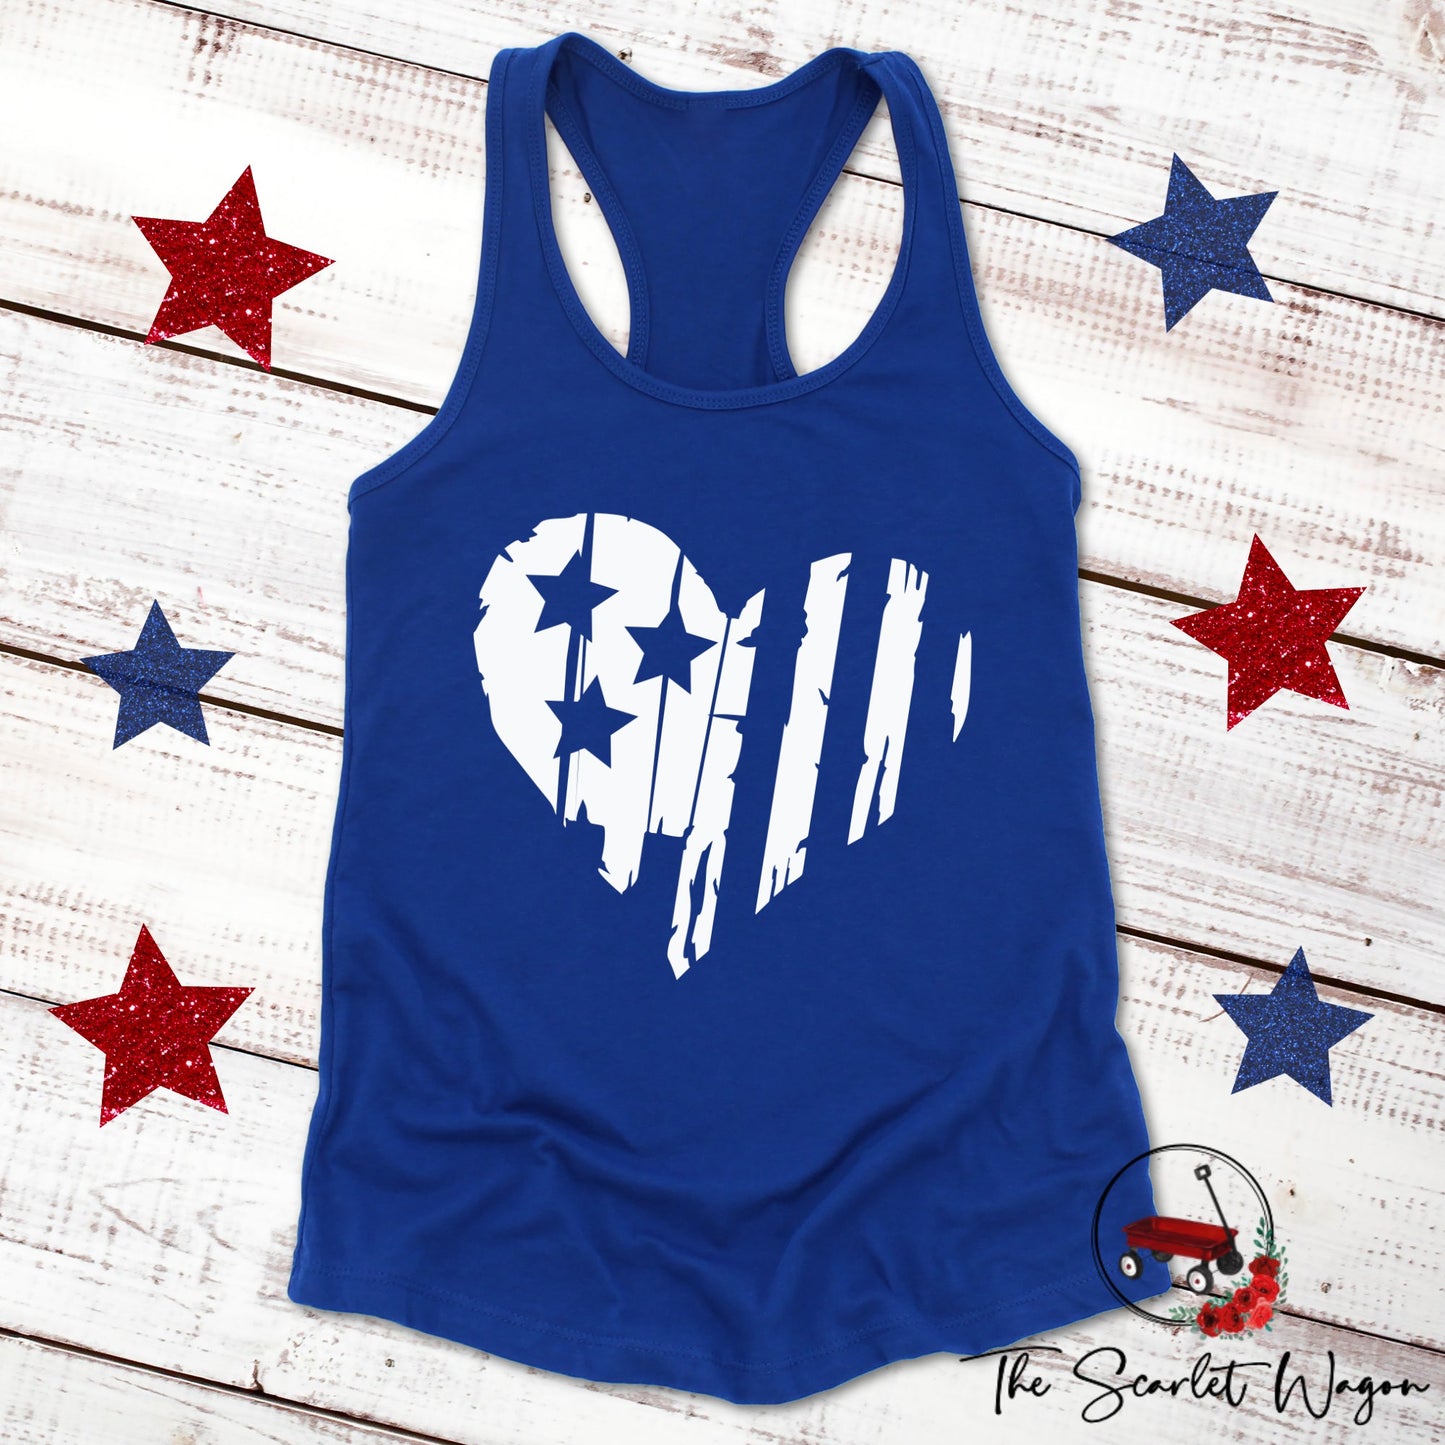 Distressed Heart-Shaped Flag Women's Racerback Tank Patriotic Shirt The Scarlet Wagon Boutique Blue Small 